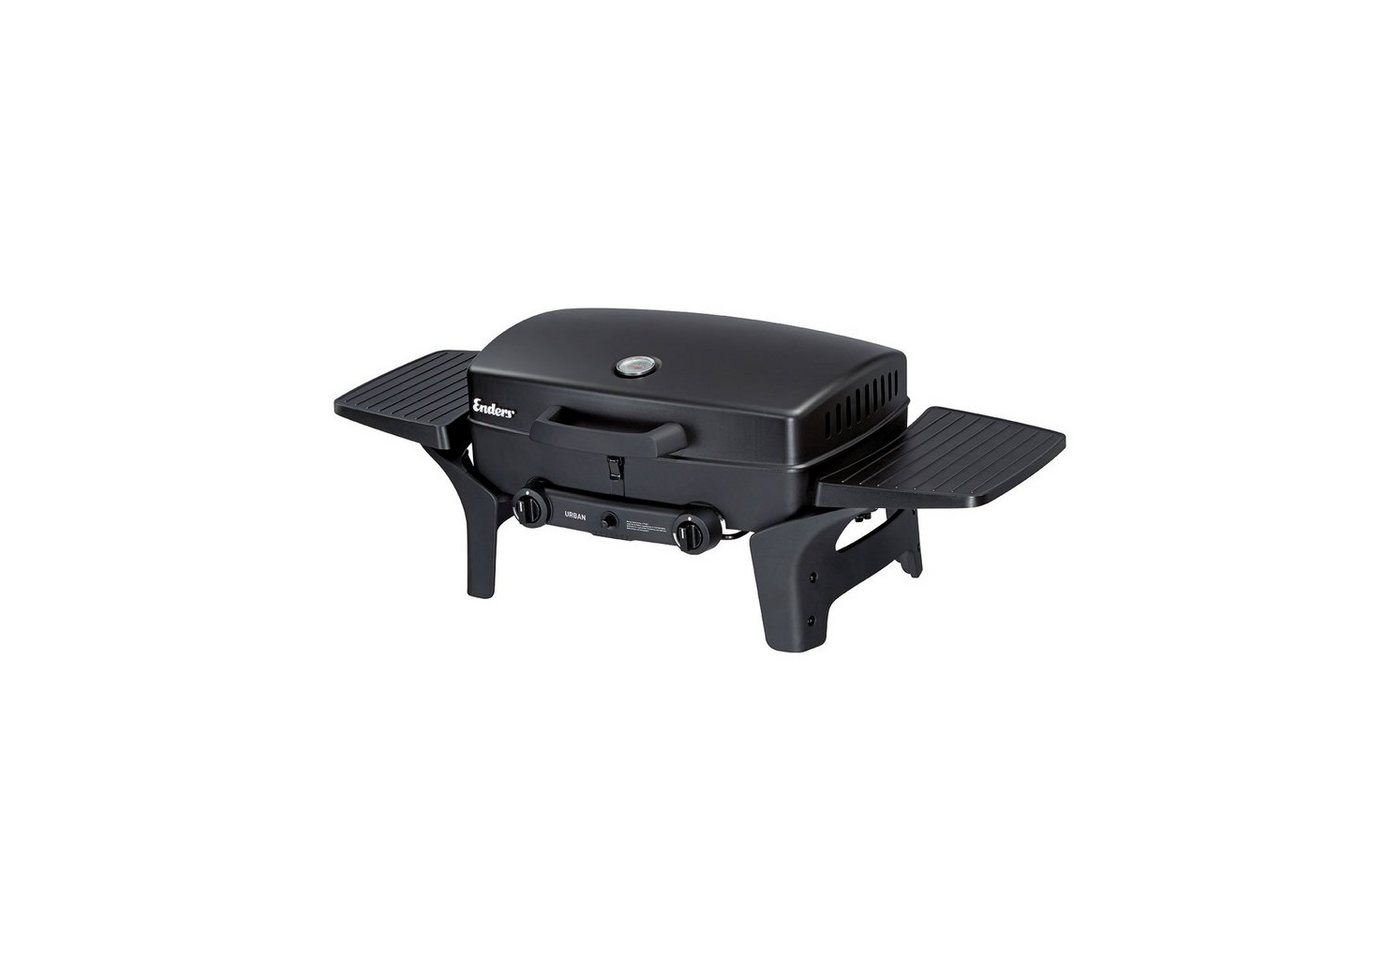 Enders® Gasgrill Urban Gas Grill-Camping Gasgrill, Camping Grill - Gasgrill 2 Brenner von Enders®